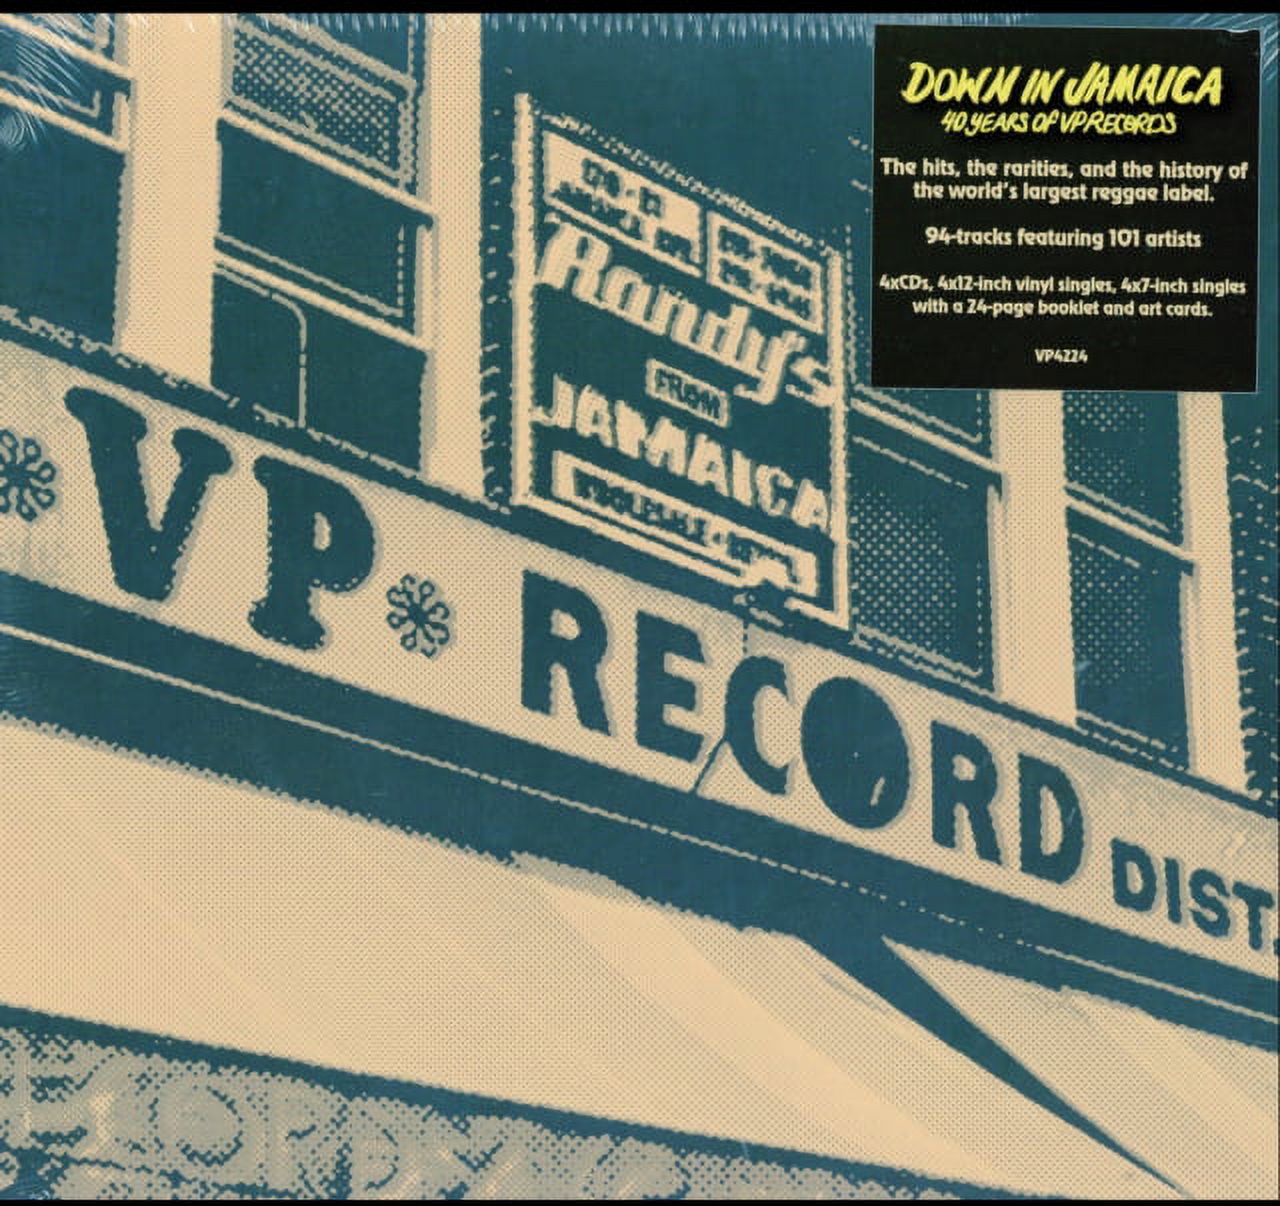 Down In Jamaica - 40 Years Of VP Records (Vinyl) - image 1 of 6